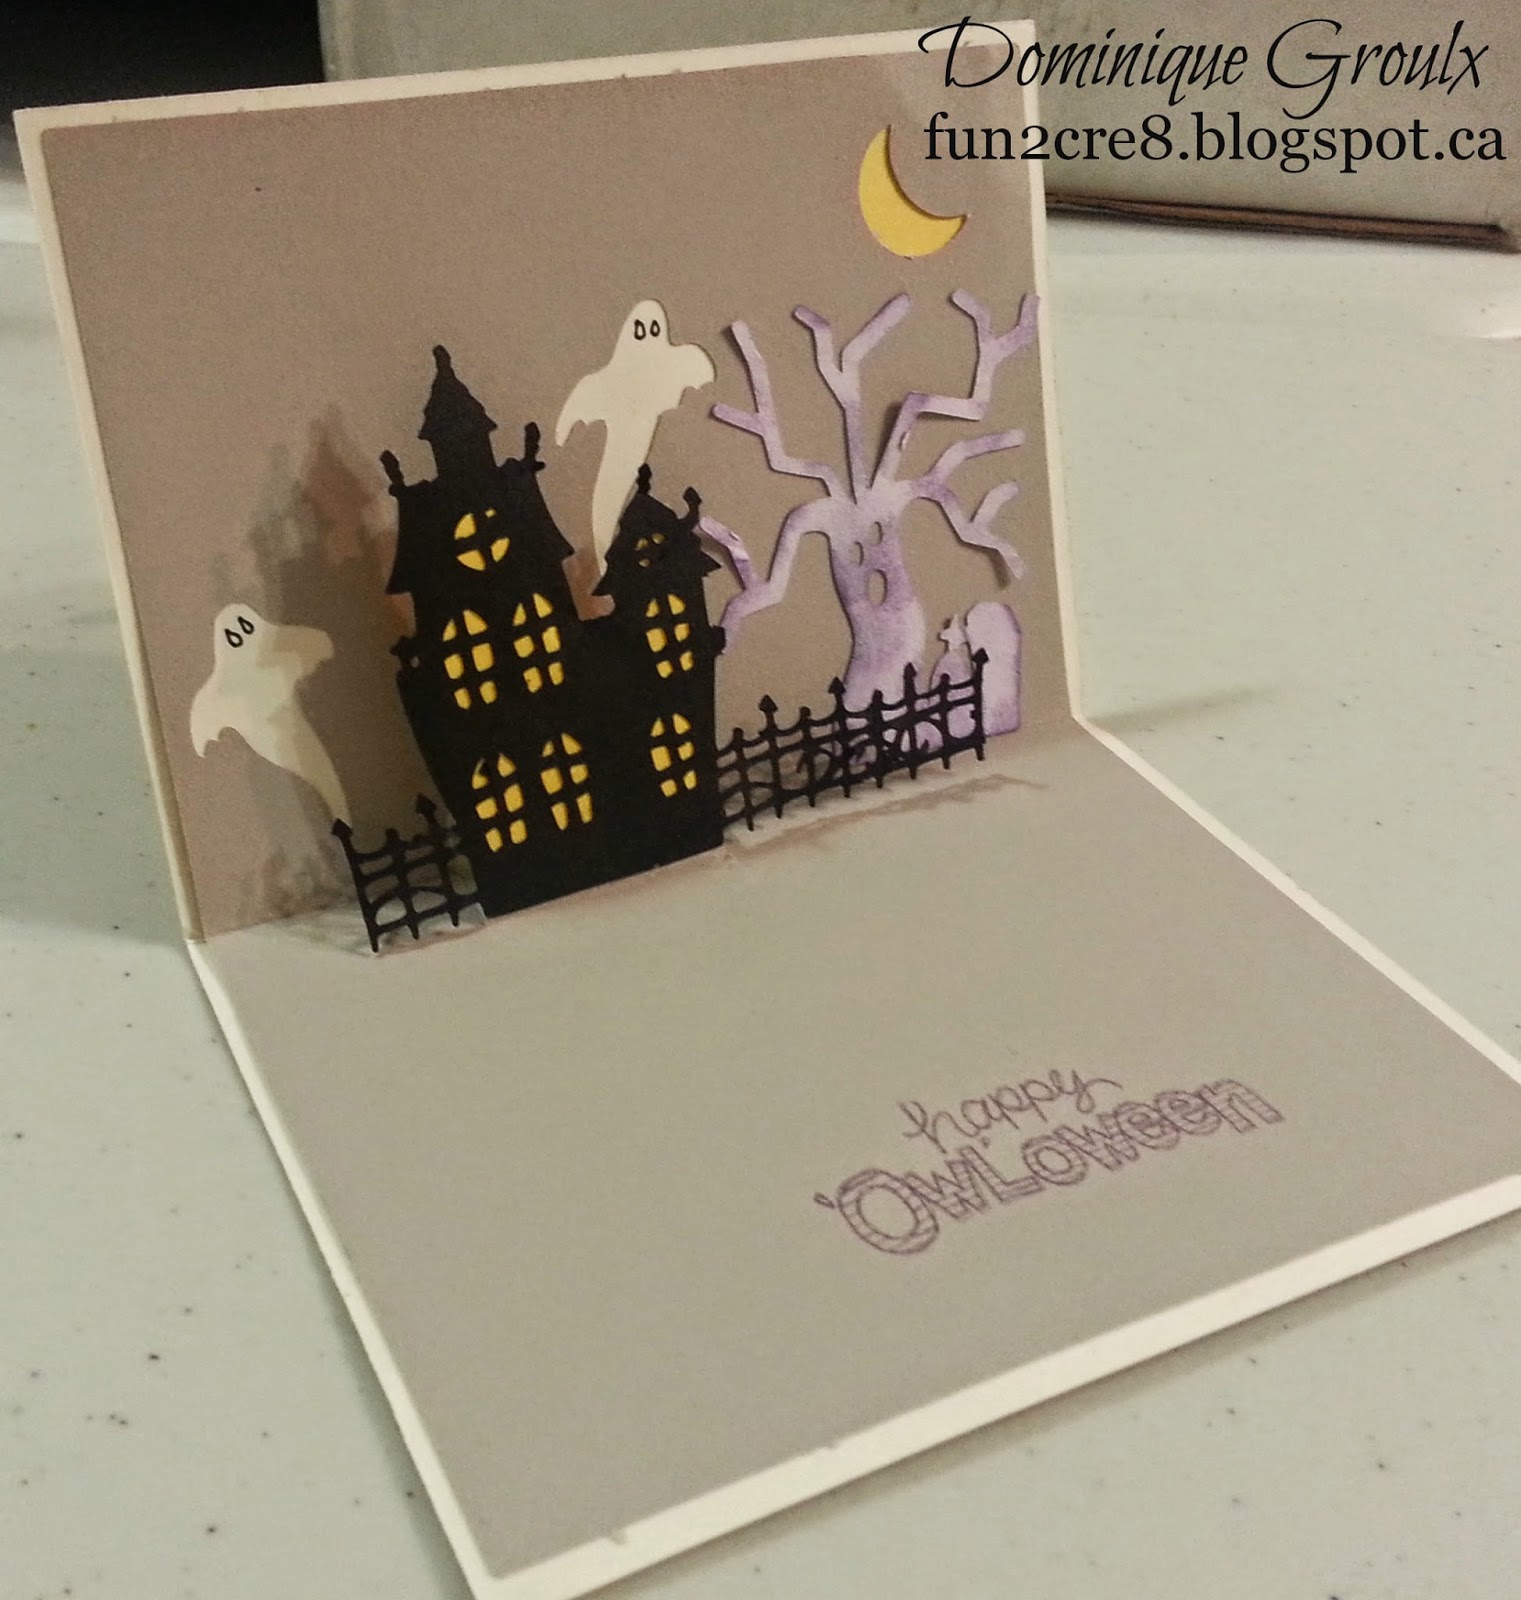 Fun2cre8 with Dominique: Halloween pop-up card